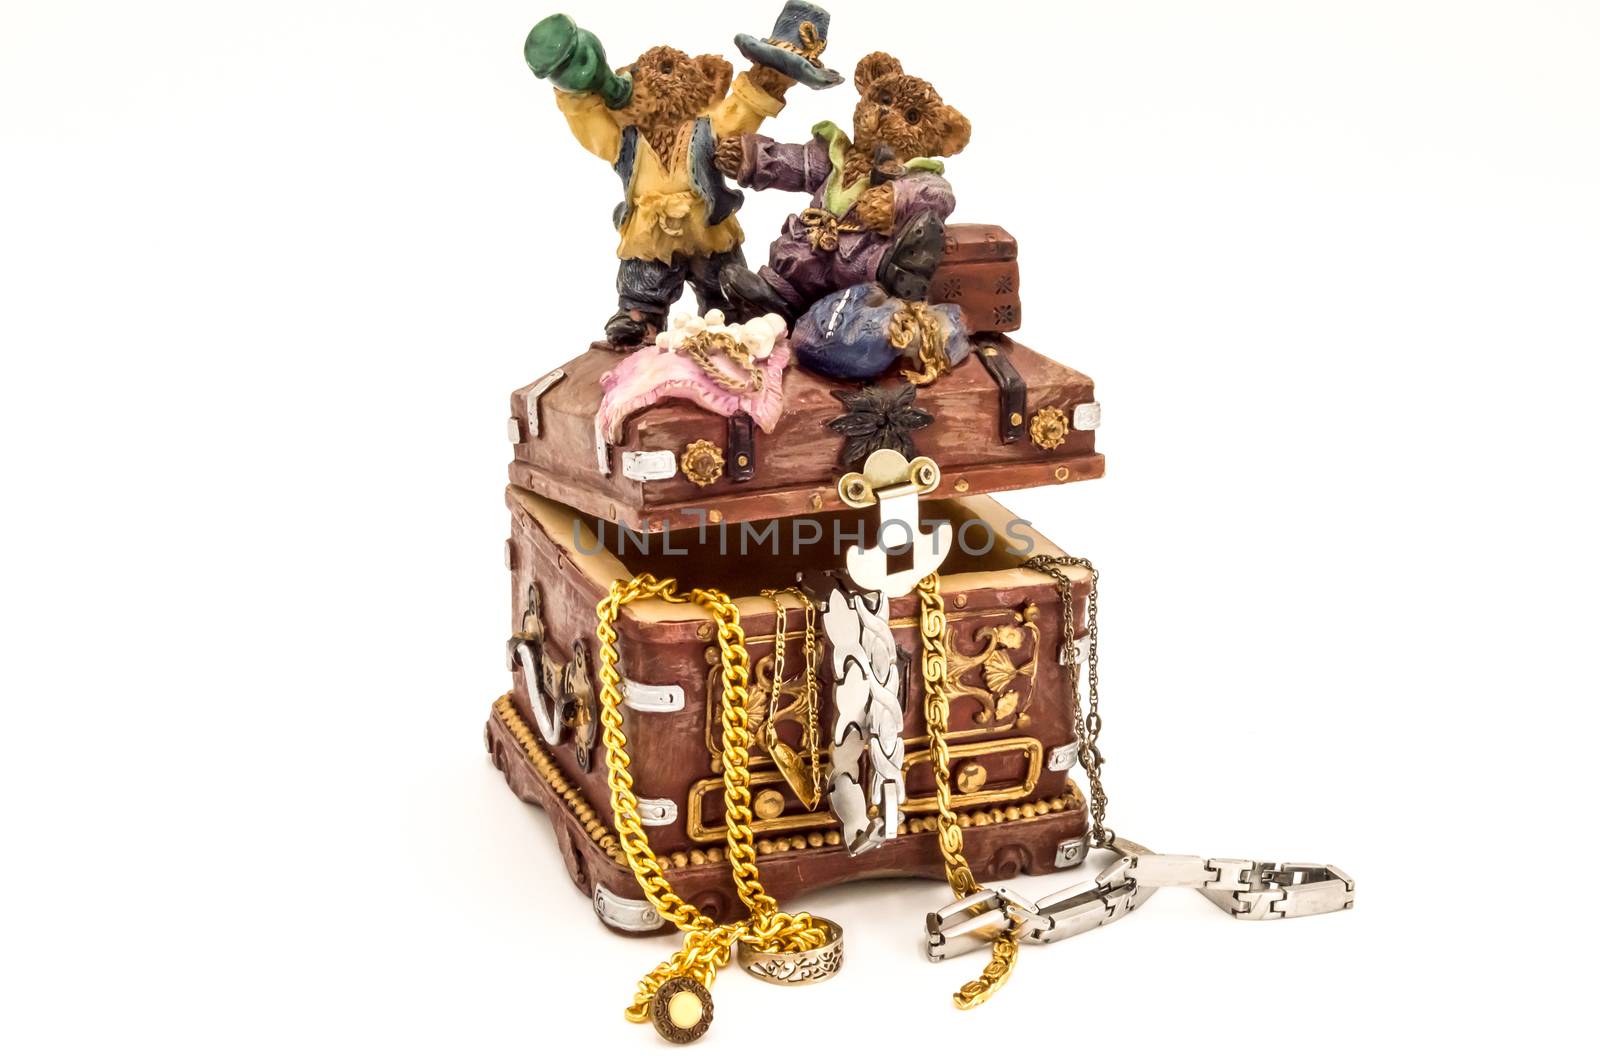 Treasure chest filled with jewelry  by Philou1000